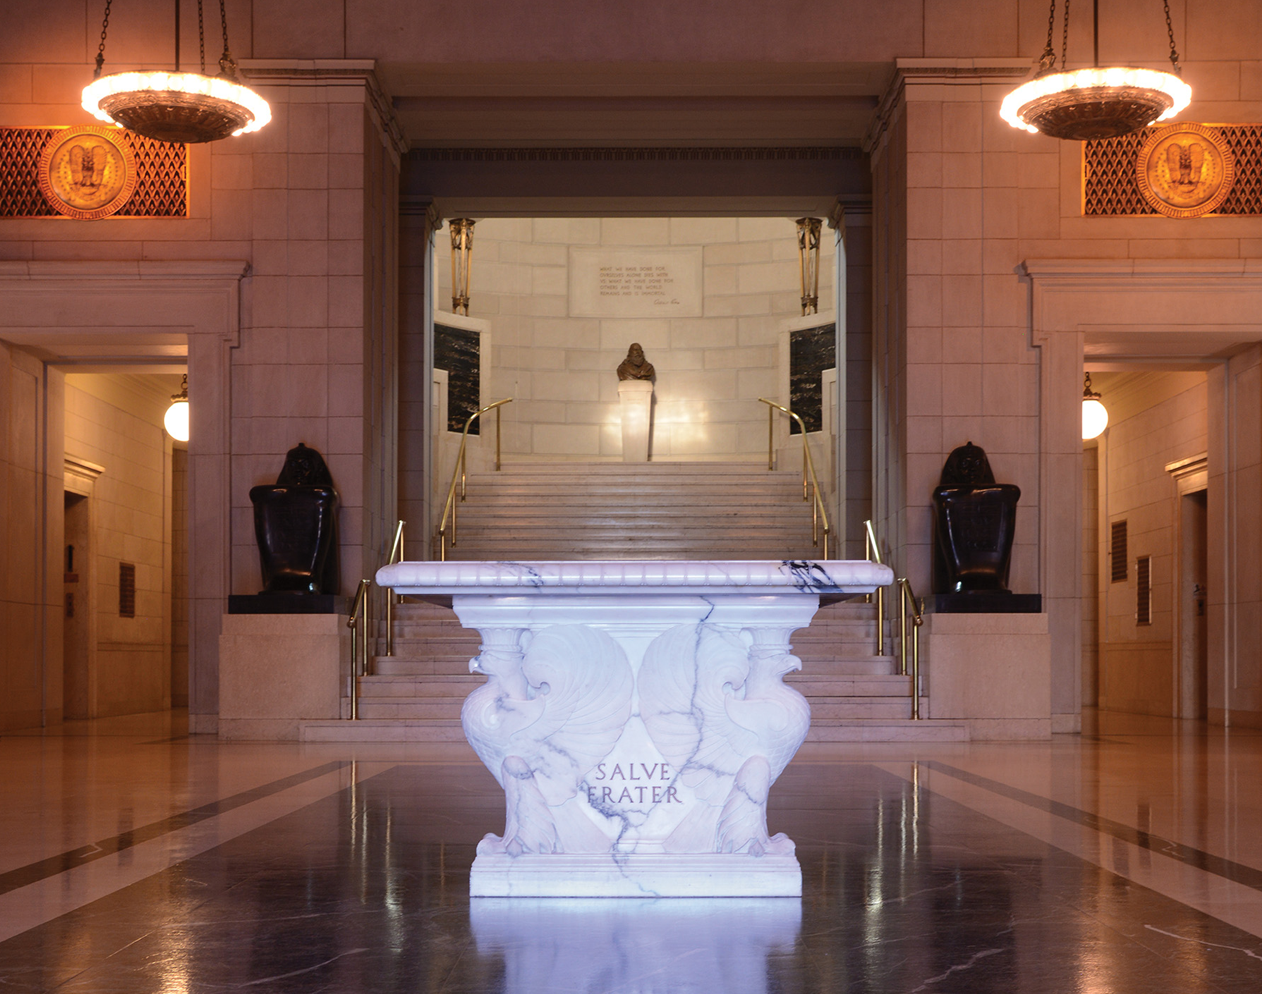 An image of the entrance of the House of the Temple in Washington, DC